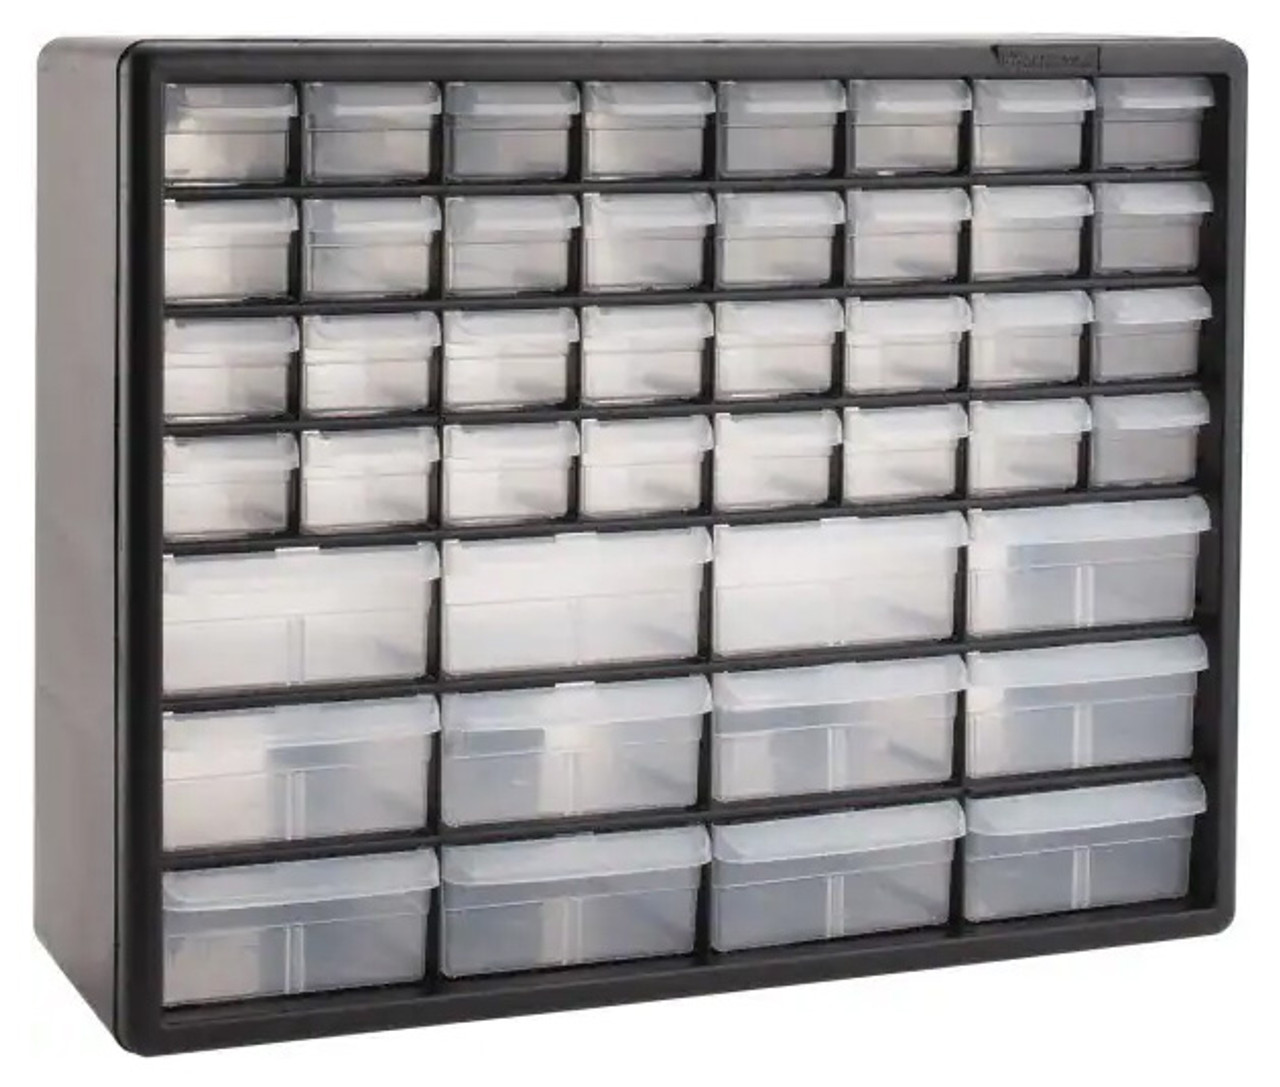 Akro-Mils 26 Drawer Plastic Storage Organizer with Drawers for